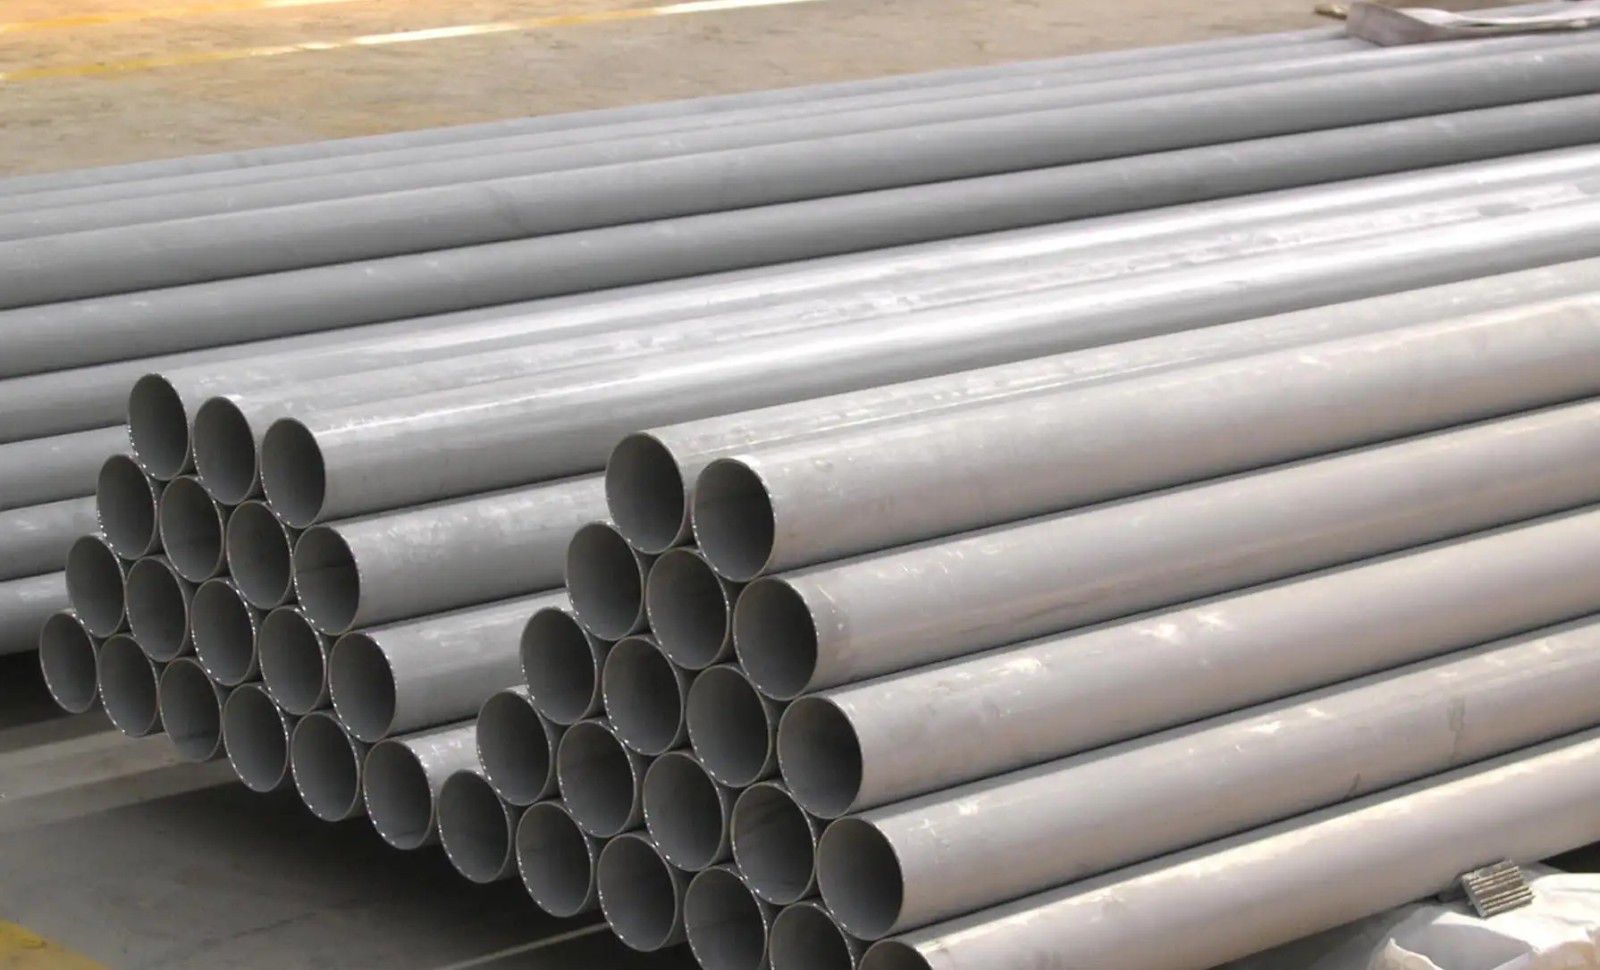 Bissau Stainless steel strip manufacturerCost support is high